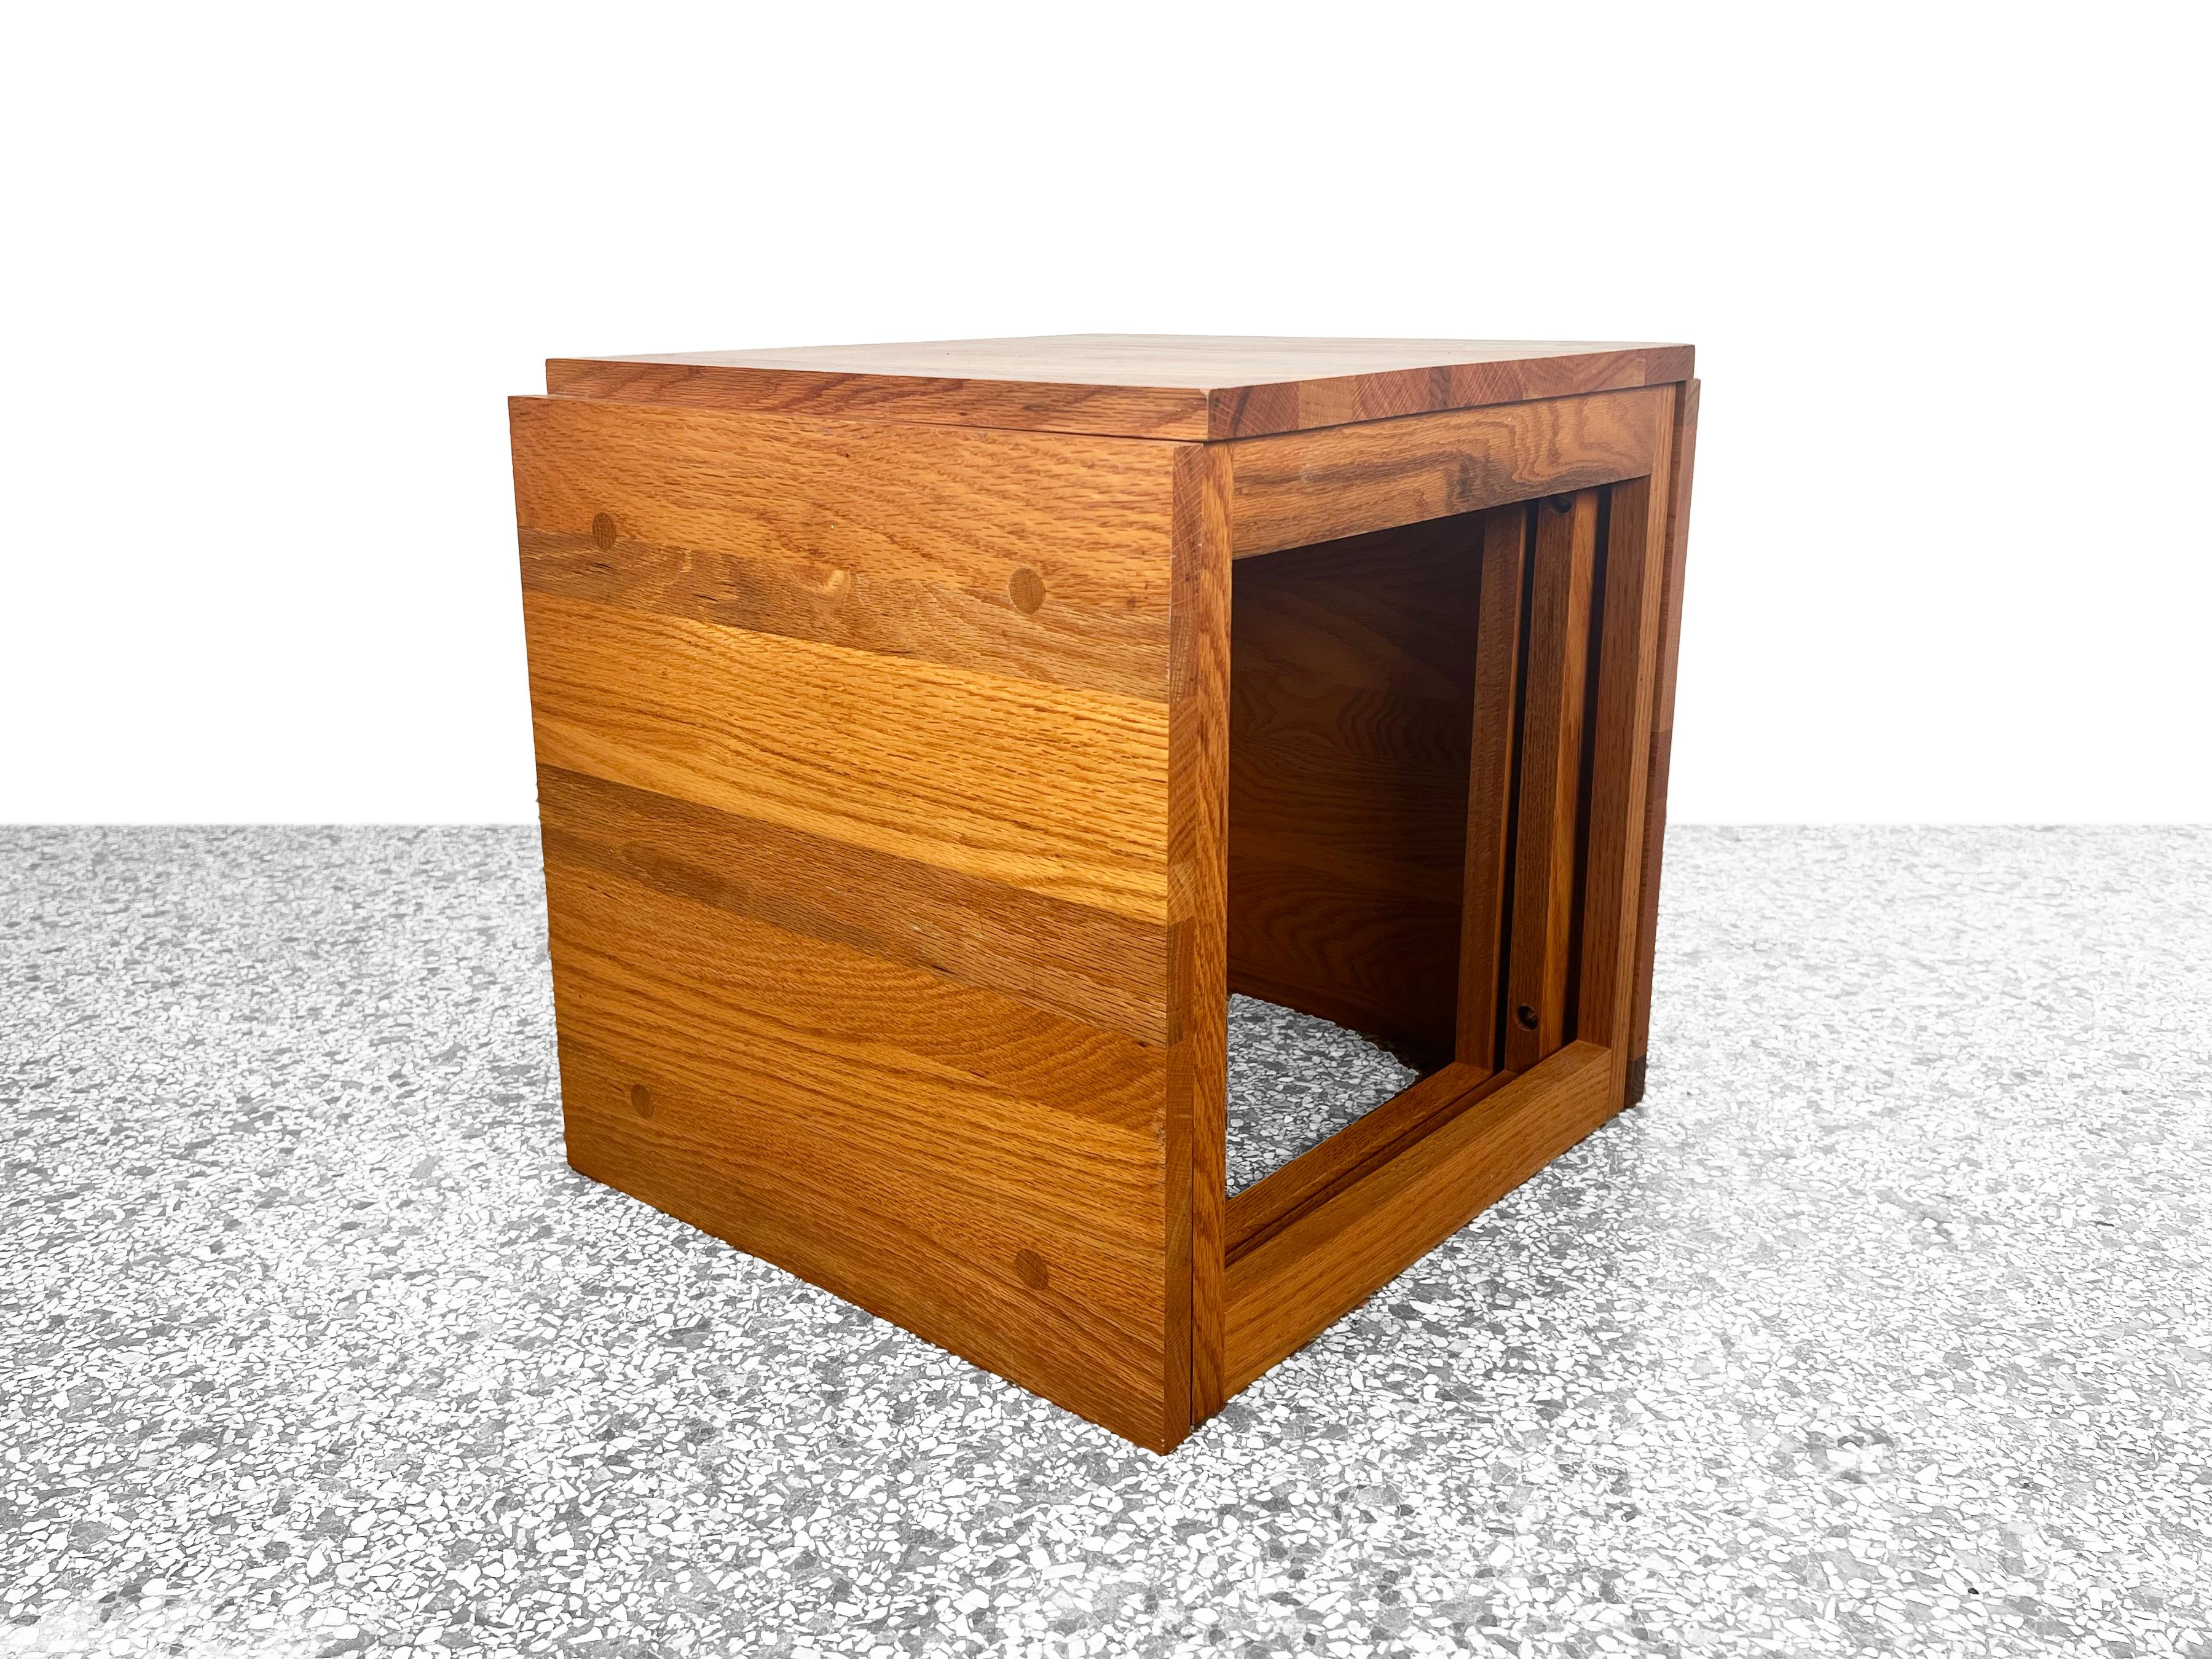  Vintage Studio Crafted Solid Oak Cube of Nesting Tables In Excellent Condition For Sale In Fort Lauderdale, FL